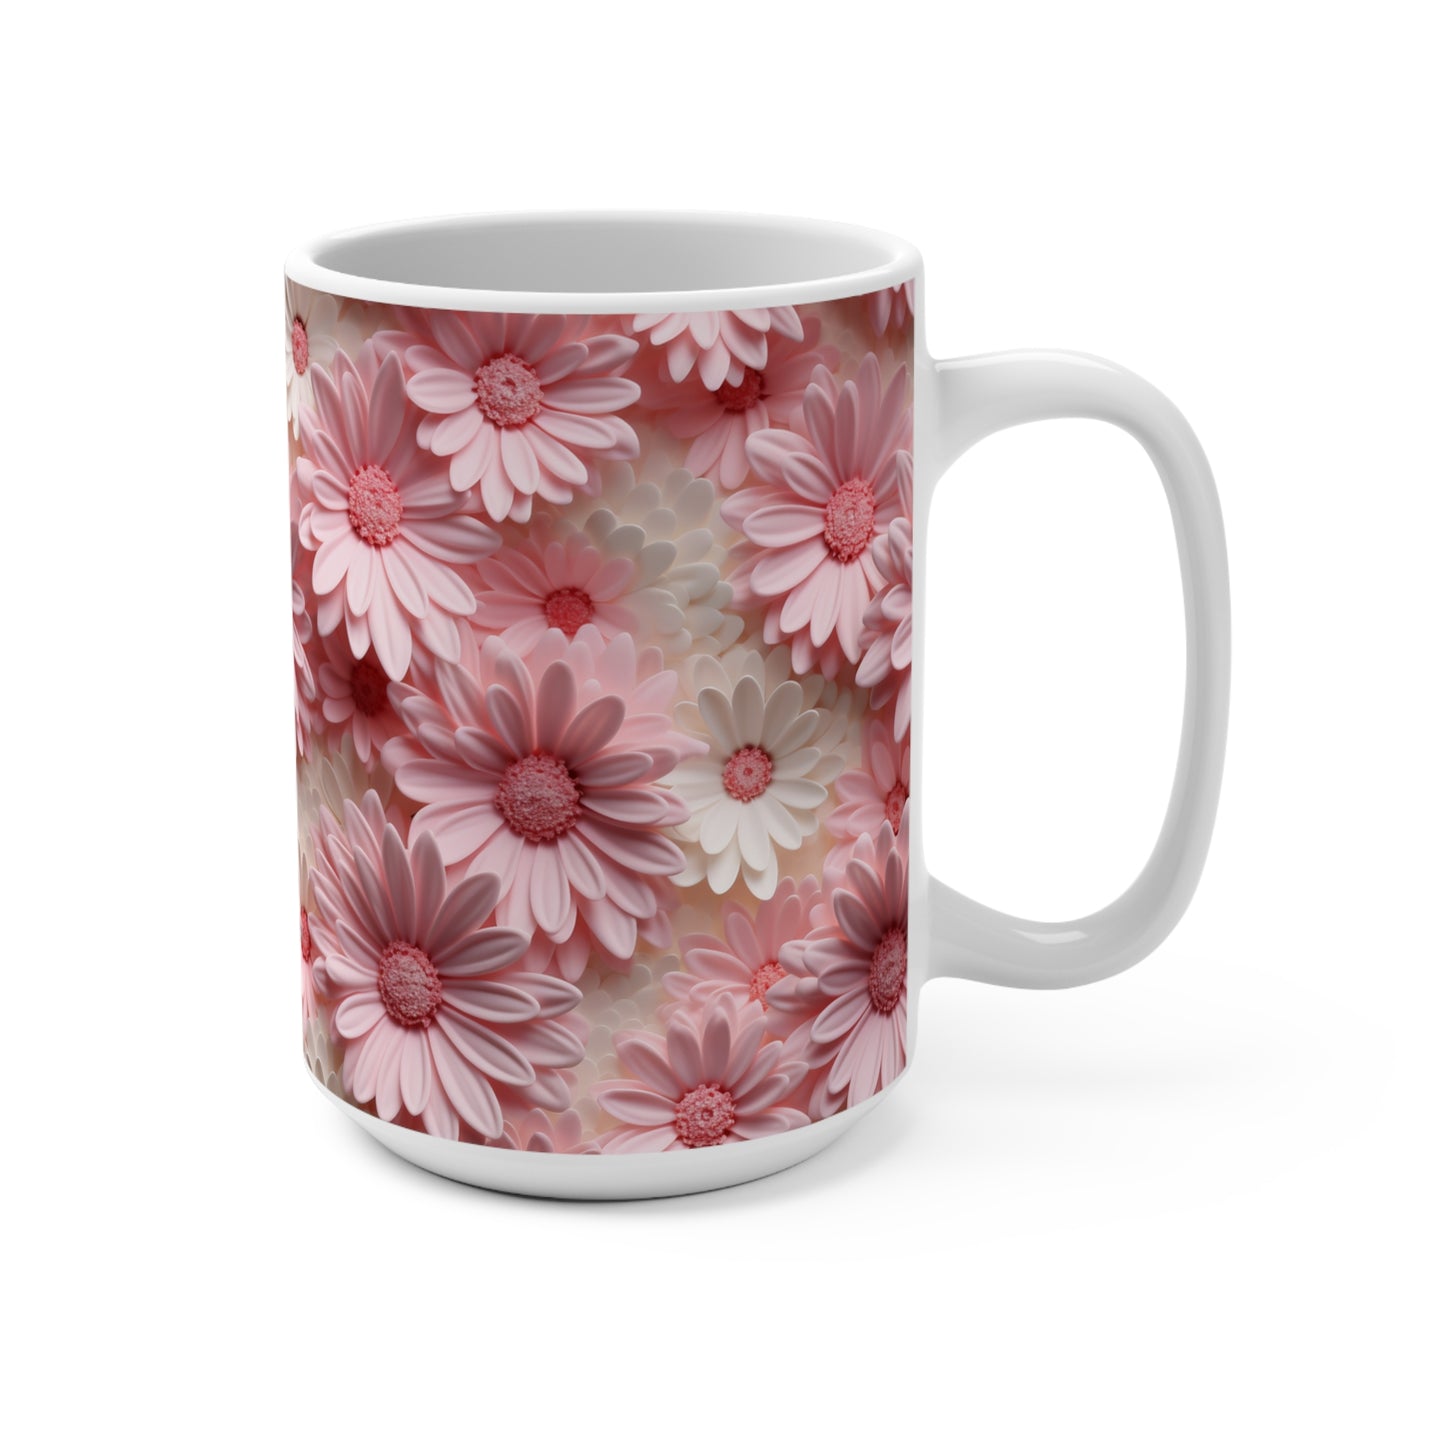 Floral Mug, Pink Daisy Print, Mother's Day Gift, Flowers Coffee Cup, Spring Bloom Kitchenware, Birthday Present, Cute Mug for Her, Unique Gift Idea, Mug 15oz